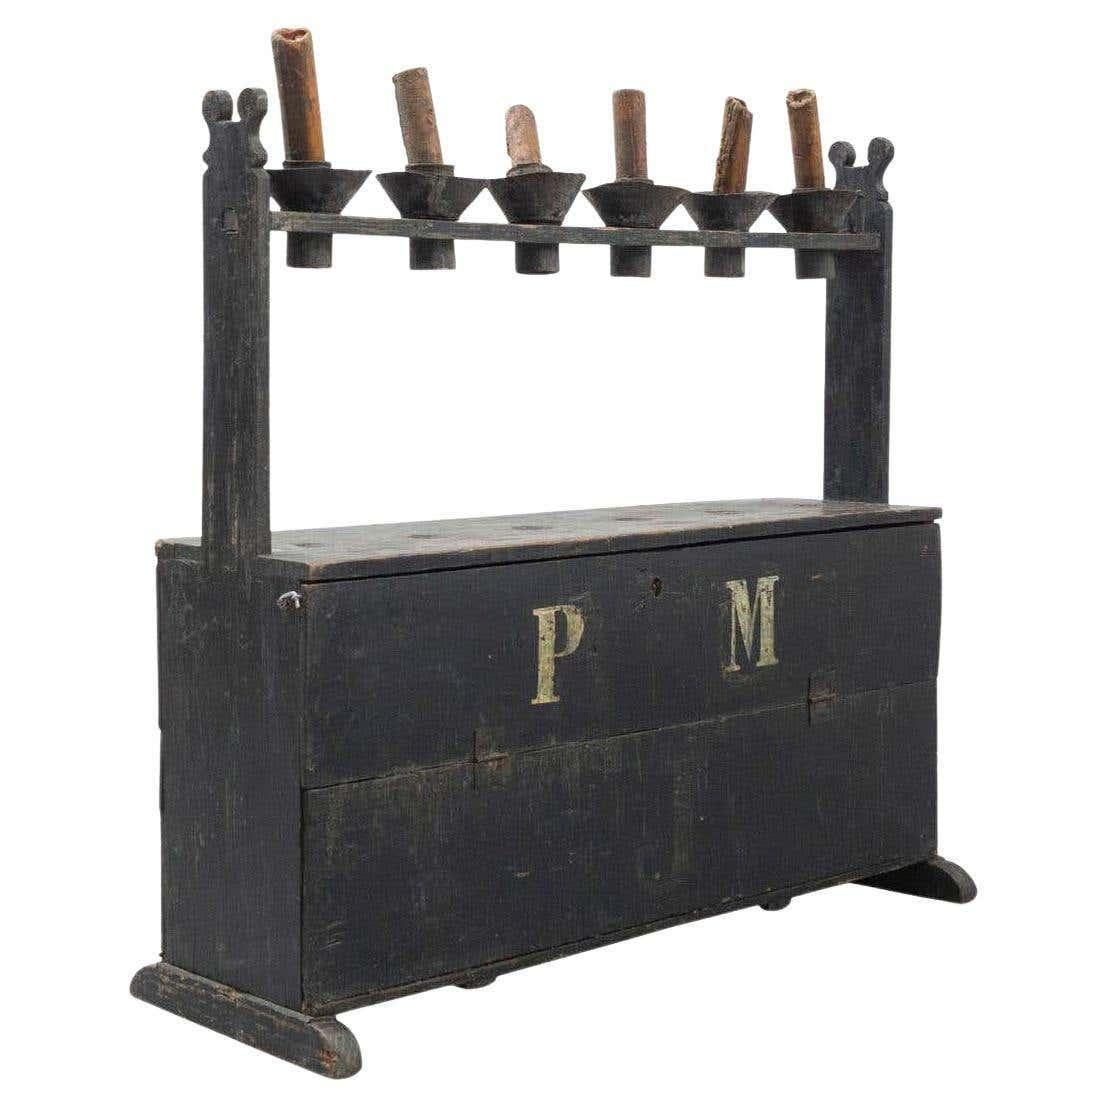 Big Spanish 'Hachero' Traditional Ancient Stained Wood Candleholder, circa 1940 For Sale 8